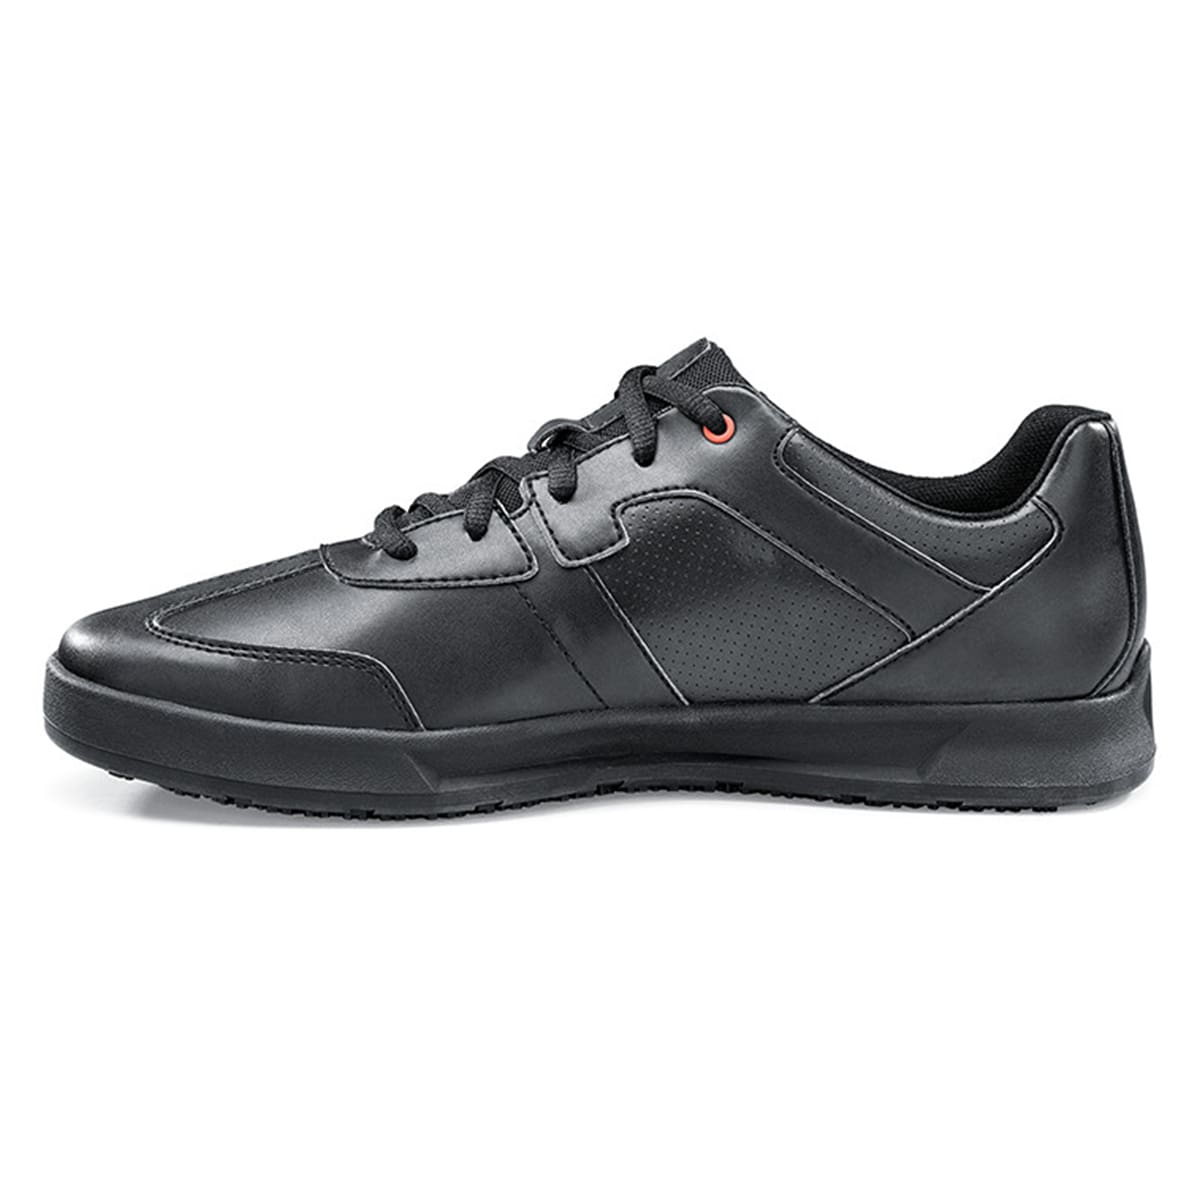 The Freestyle II from Shoes For Crews is a slip-resistant shoe featuring a removable cushioned insole, seen from the left.